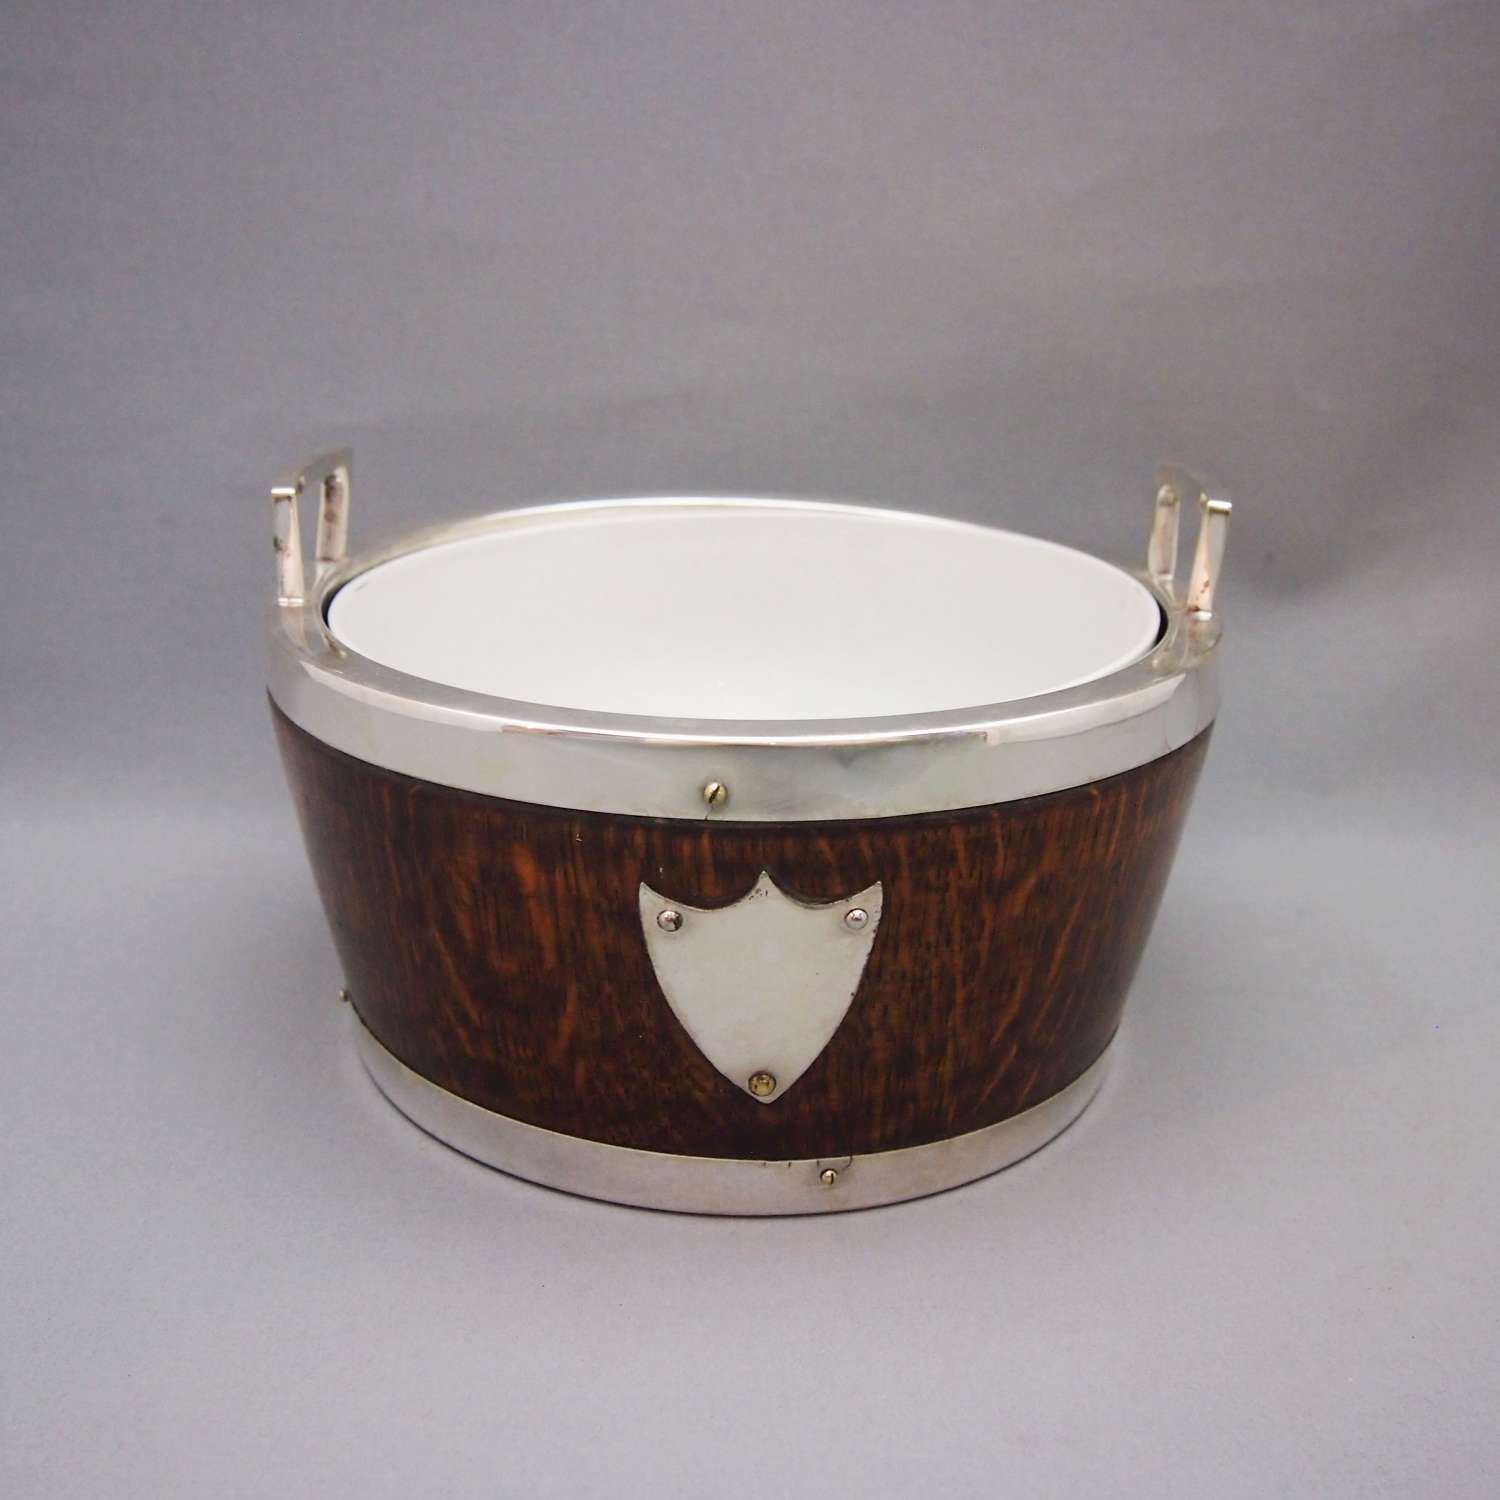 Antique Oak & Silver Plated bowl with Ceramic Liner.W8599